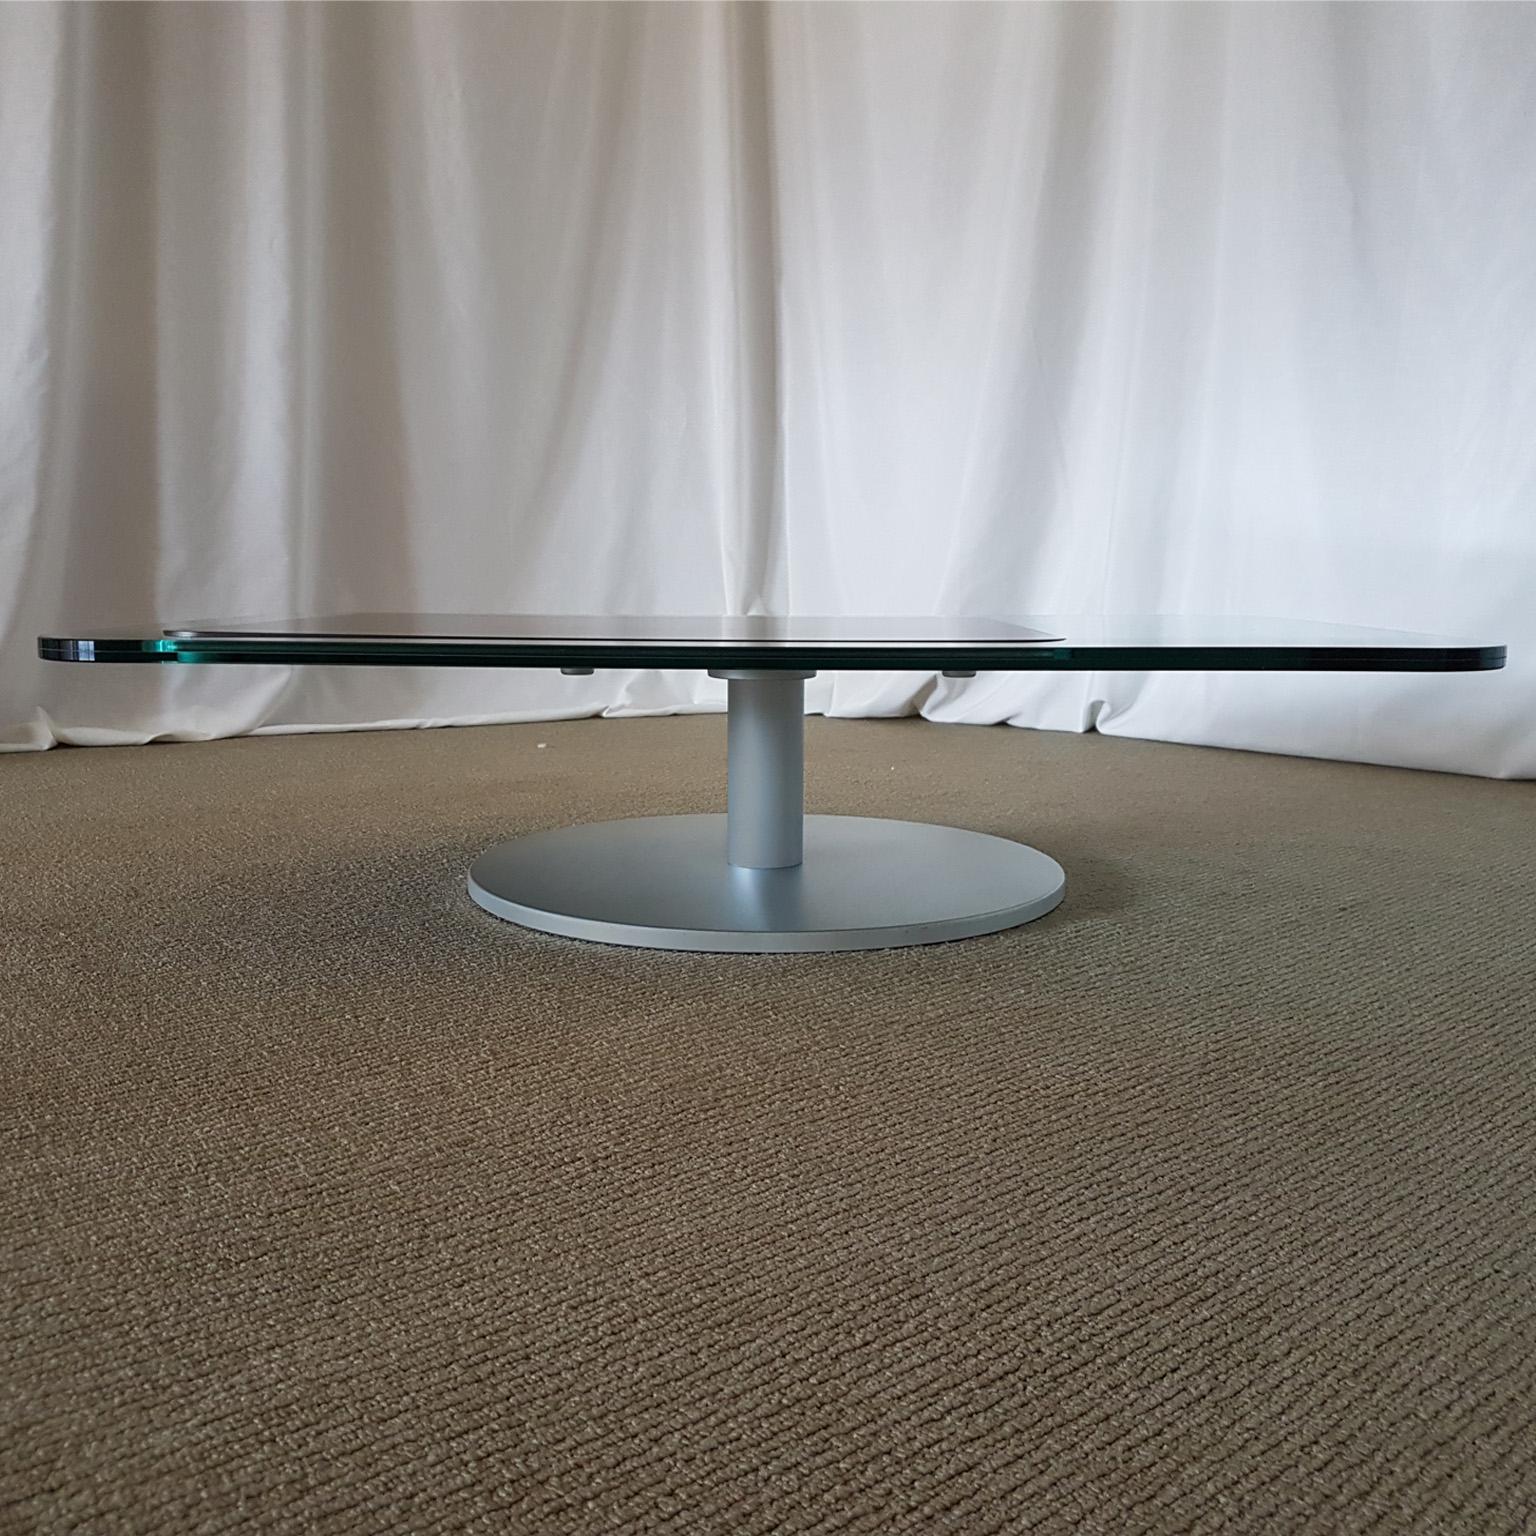 Italian Tempered Crystal Centre Table with Wood Insert, 21st Century For Sale 2